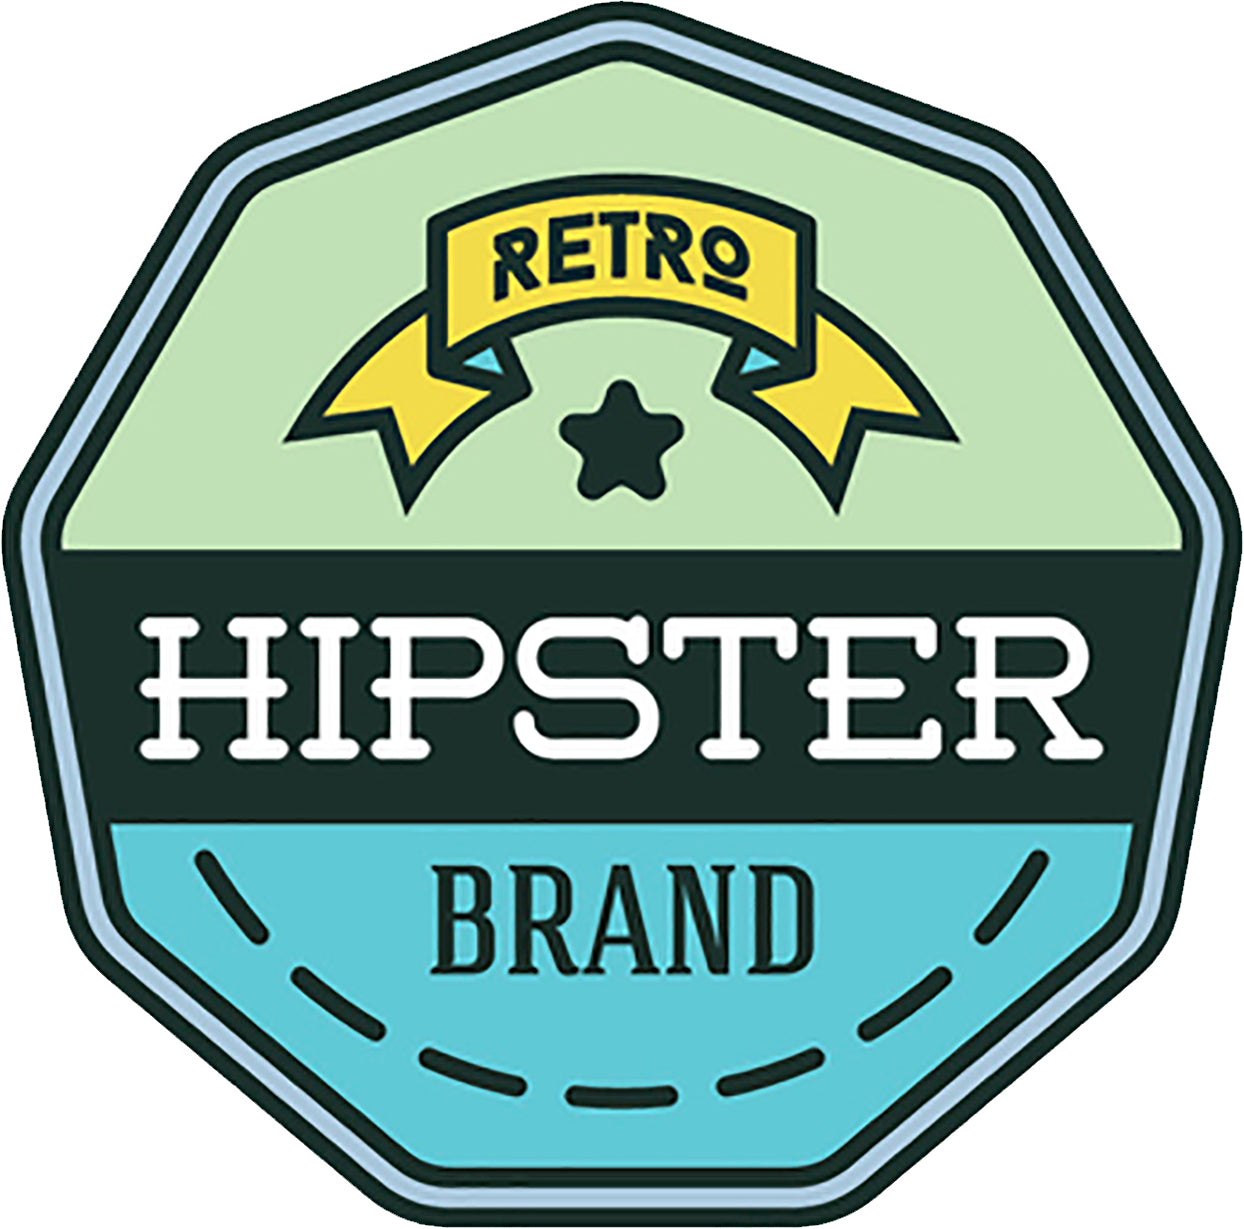 Cool Simple Hipster Vintage Product Brand Logo Icon Art #5 Vinyl Sticker